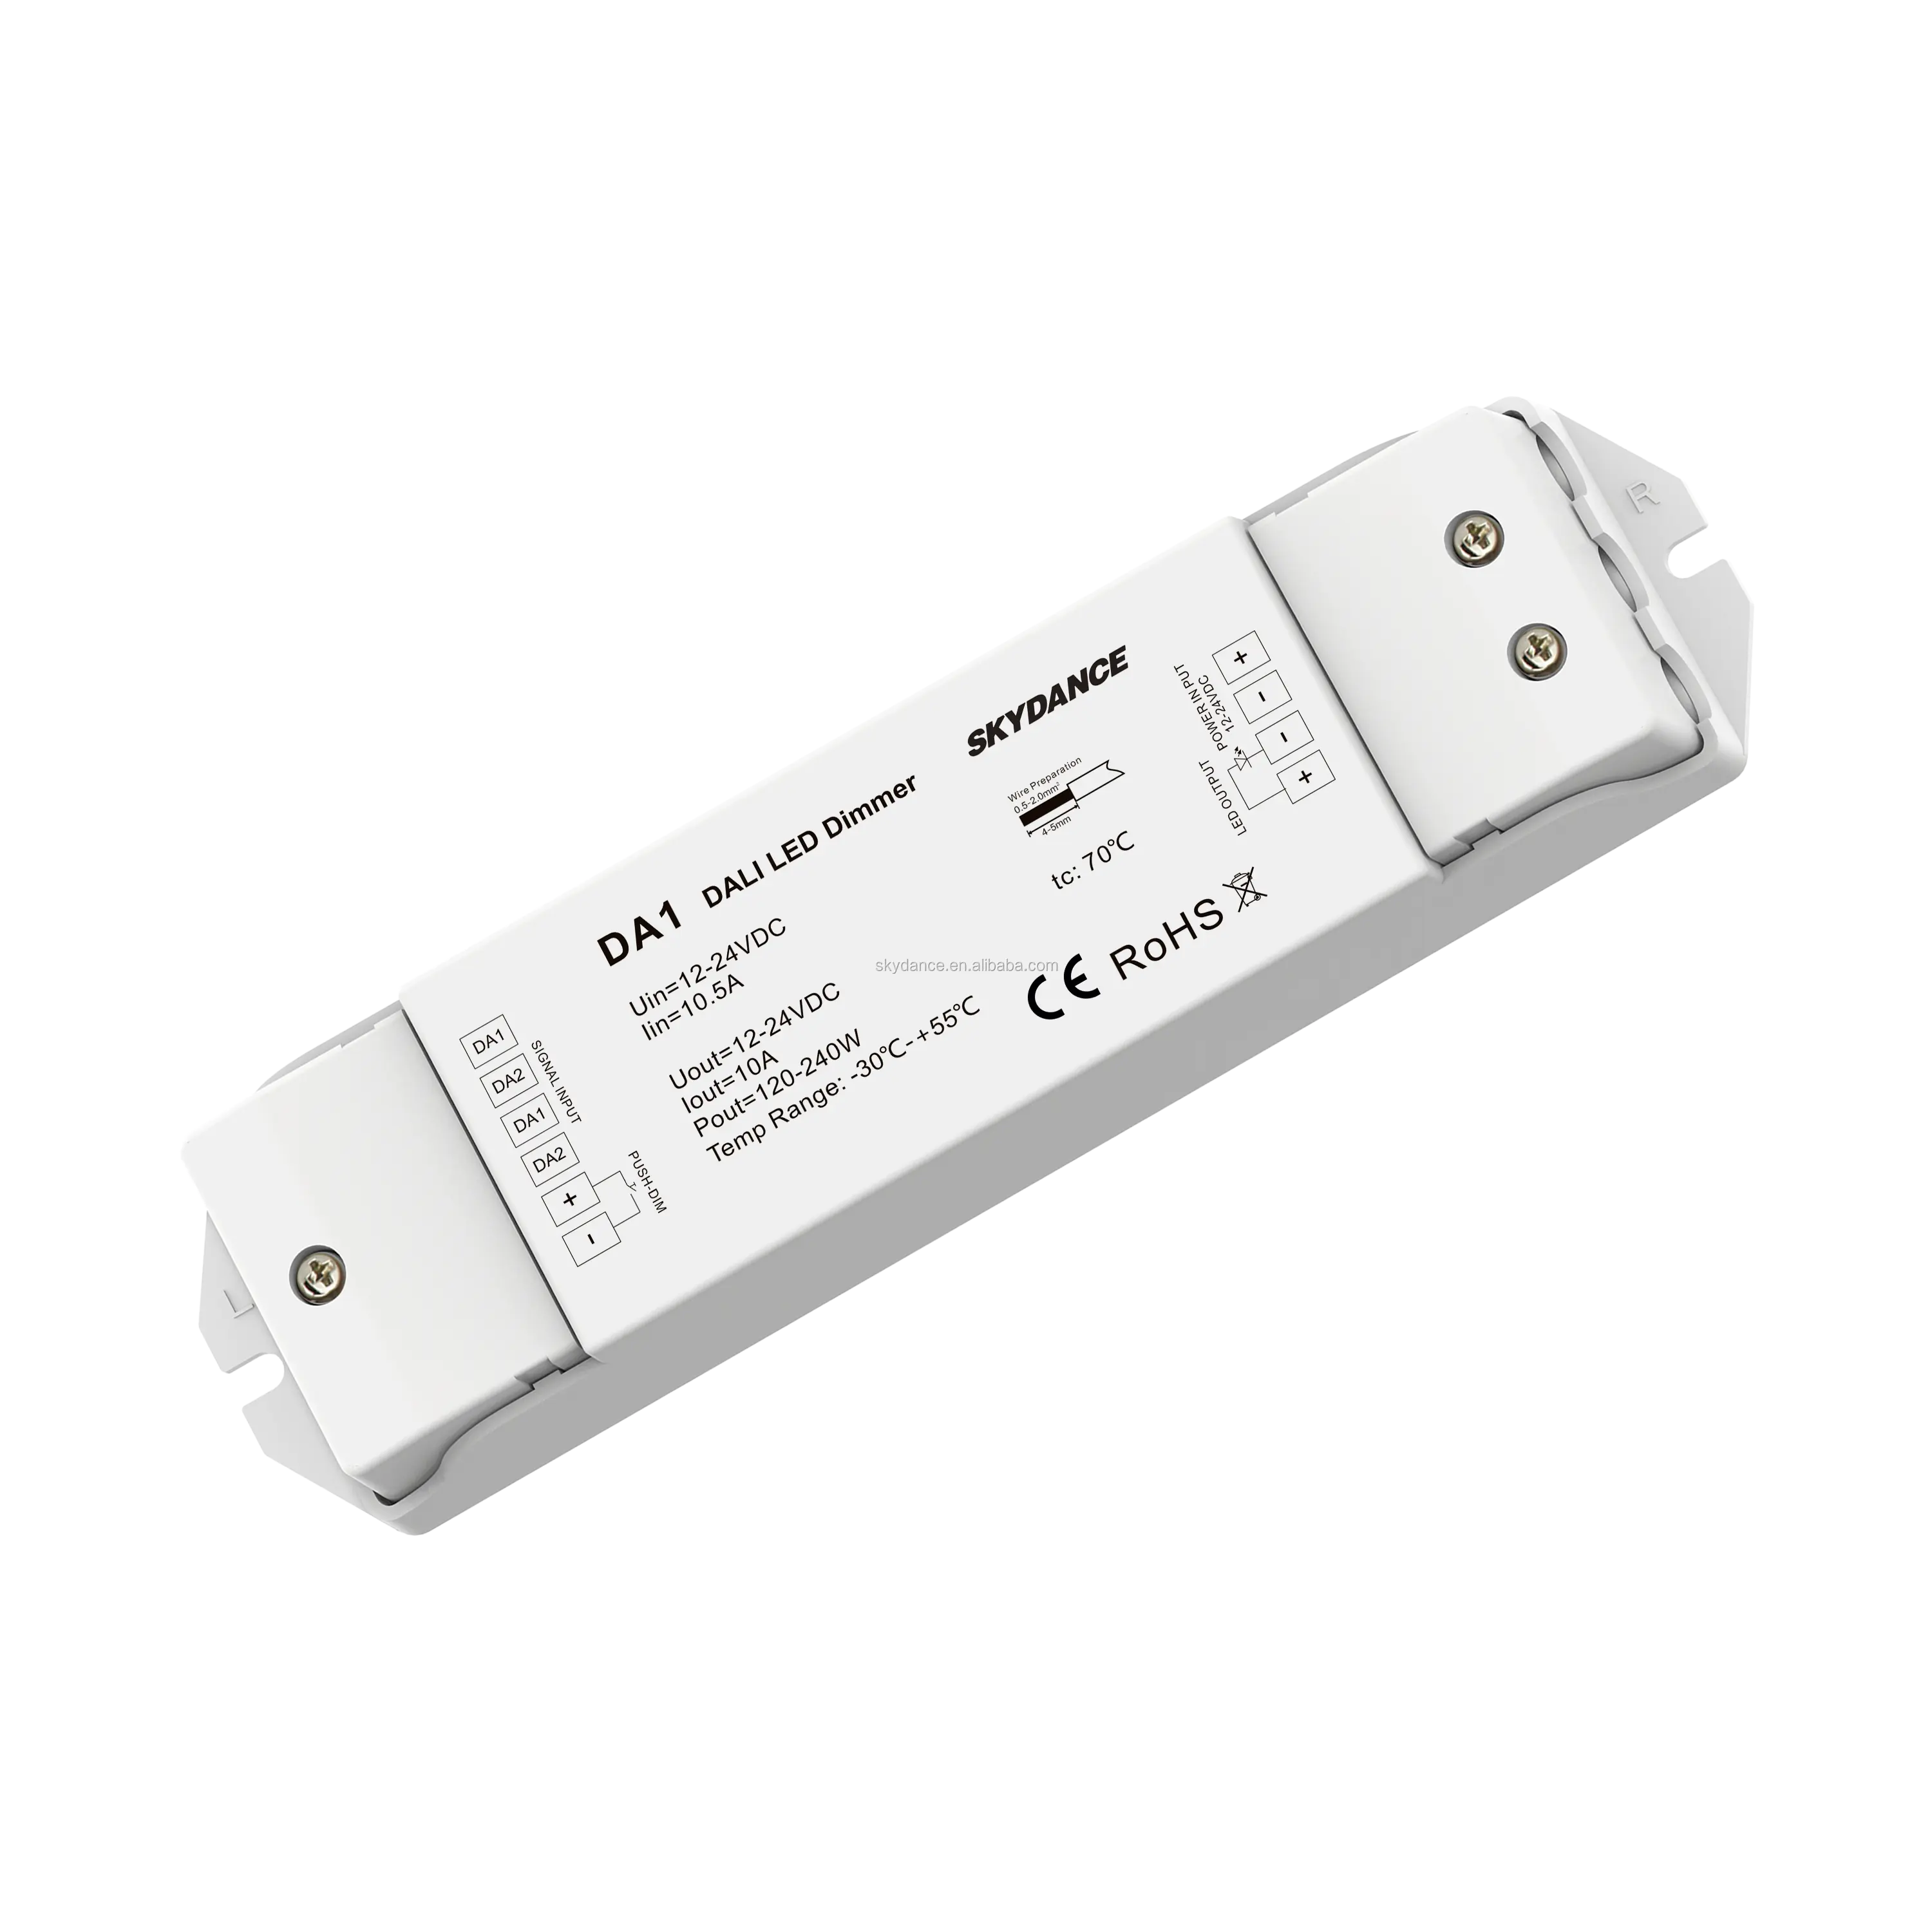 SKYDANCE DA1 12-24V DALI LED Dimmers 1 Channel DALI Receiver Constant Voltage Controller With Push-dim Switch